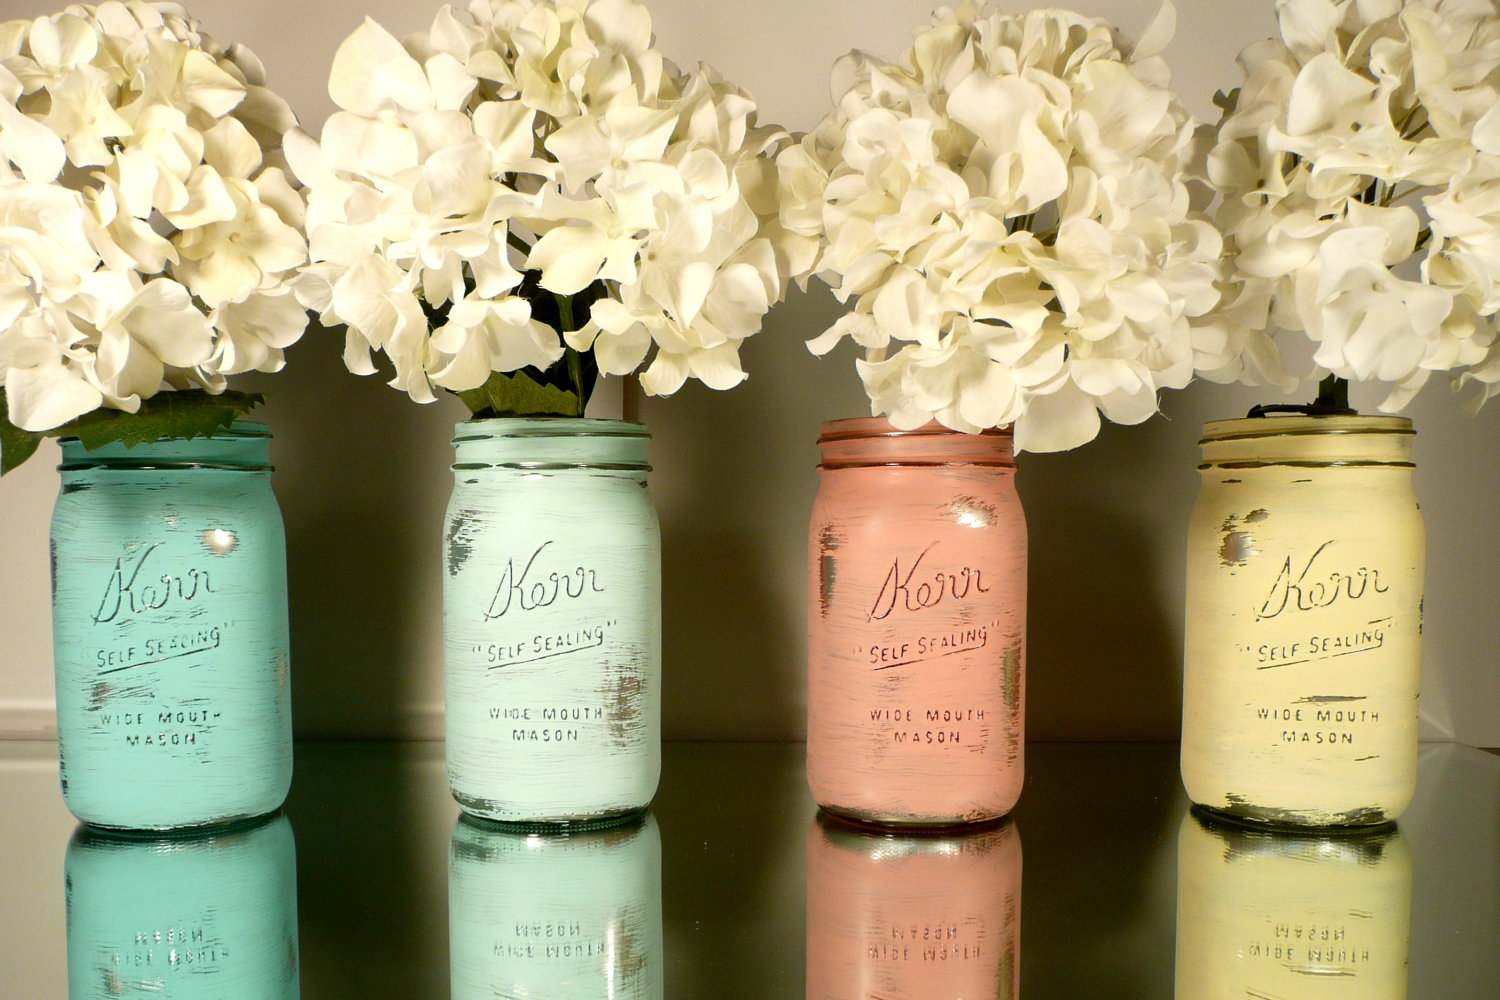 Paint These Mason Jars On The Inside And Fill Them With Flowers To